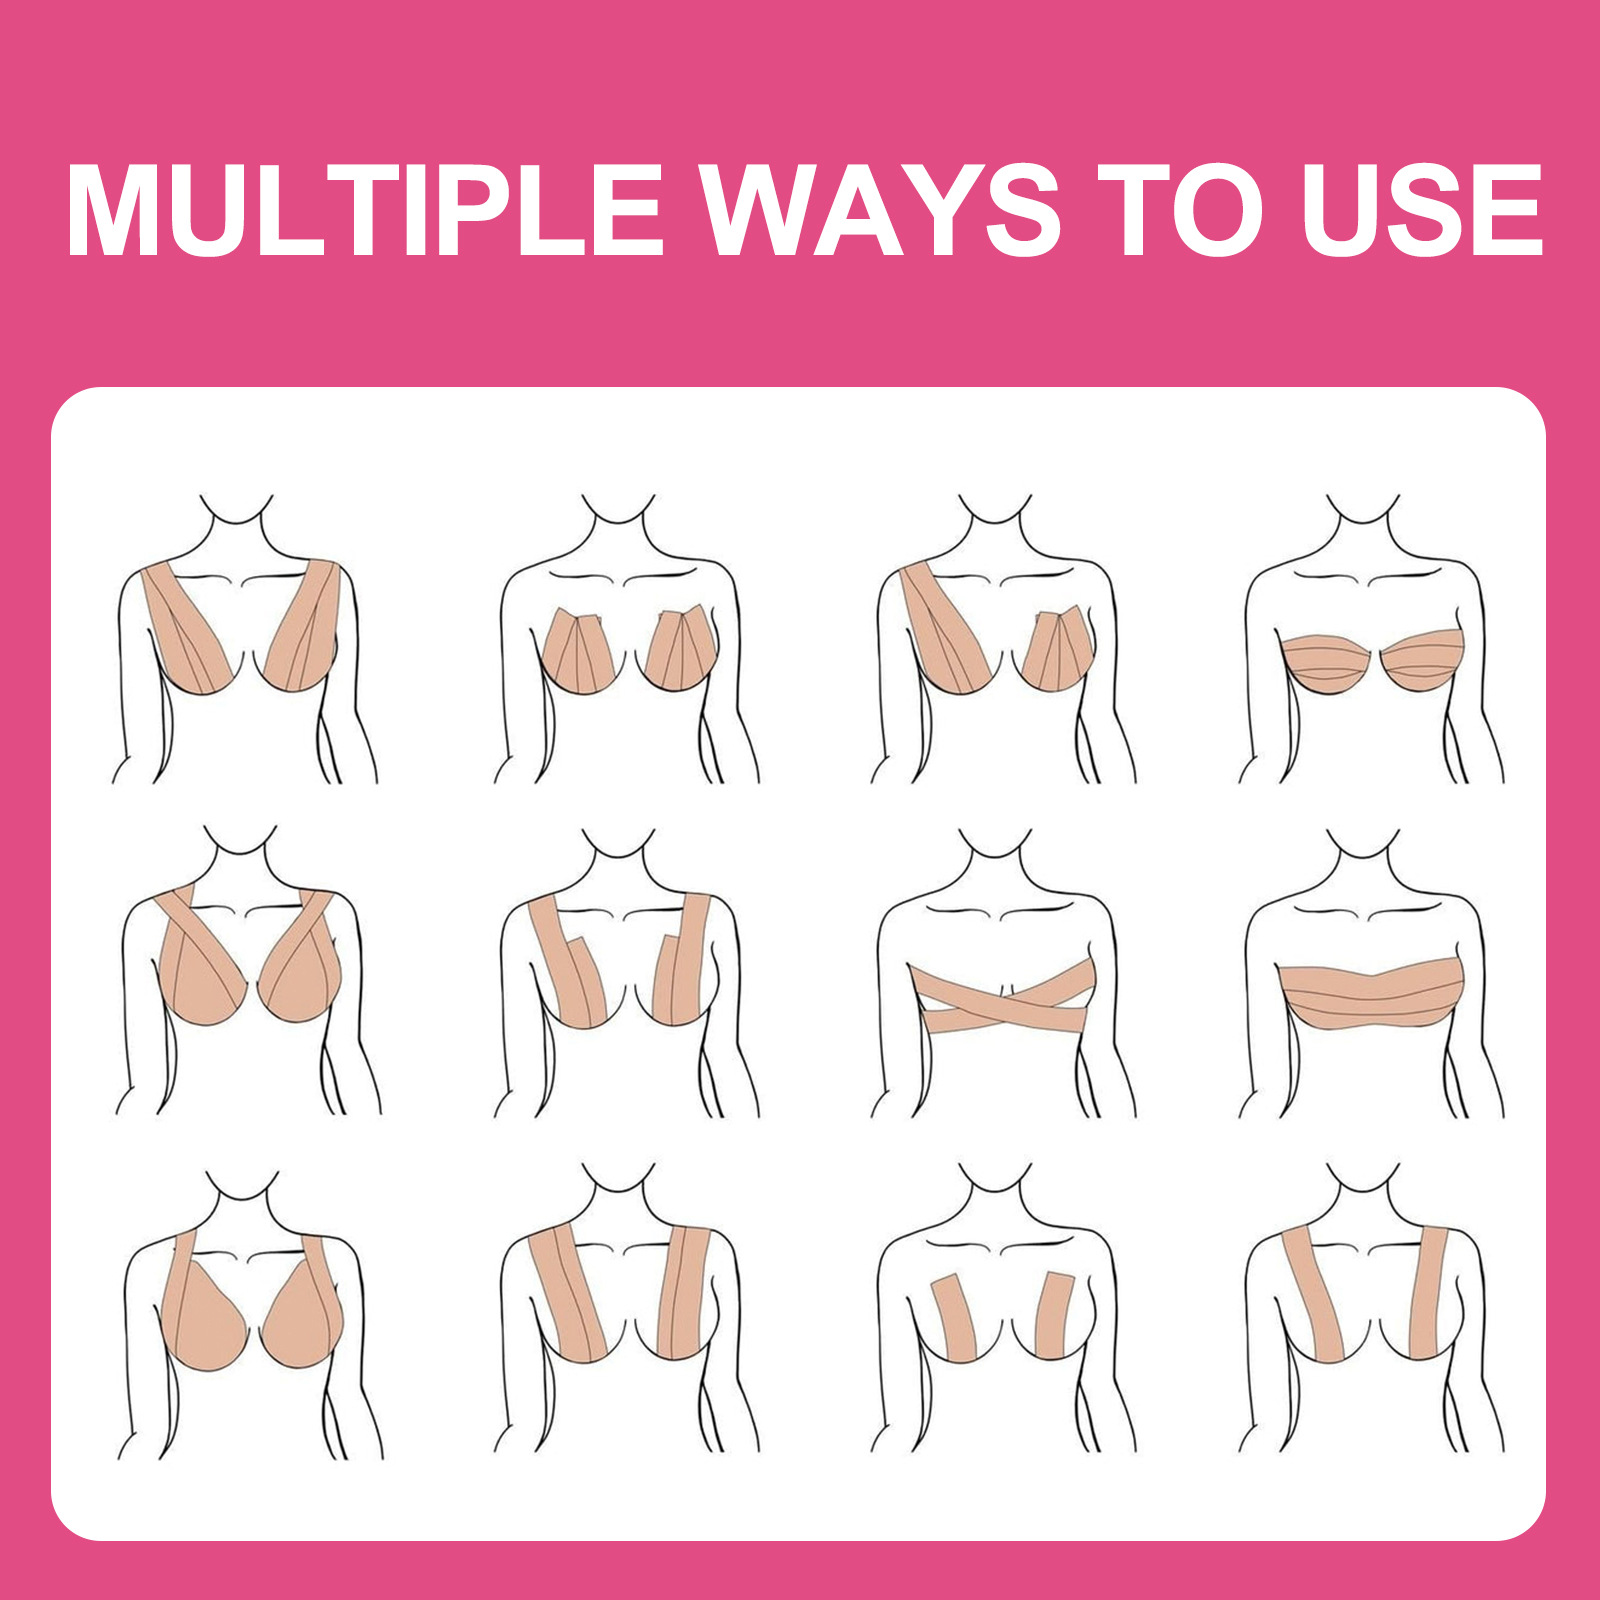 Boob Tape For Breast Lift, Achieve Chest Brace Lift & Contour Of Breasts,  Sticky Body Tape For Push Up & Shape In All Clothing Fabric Dress Types